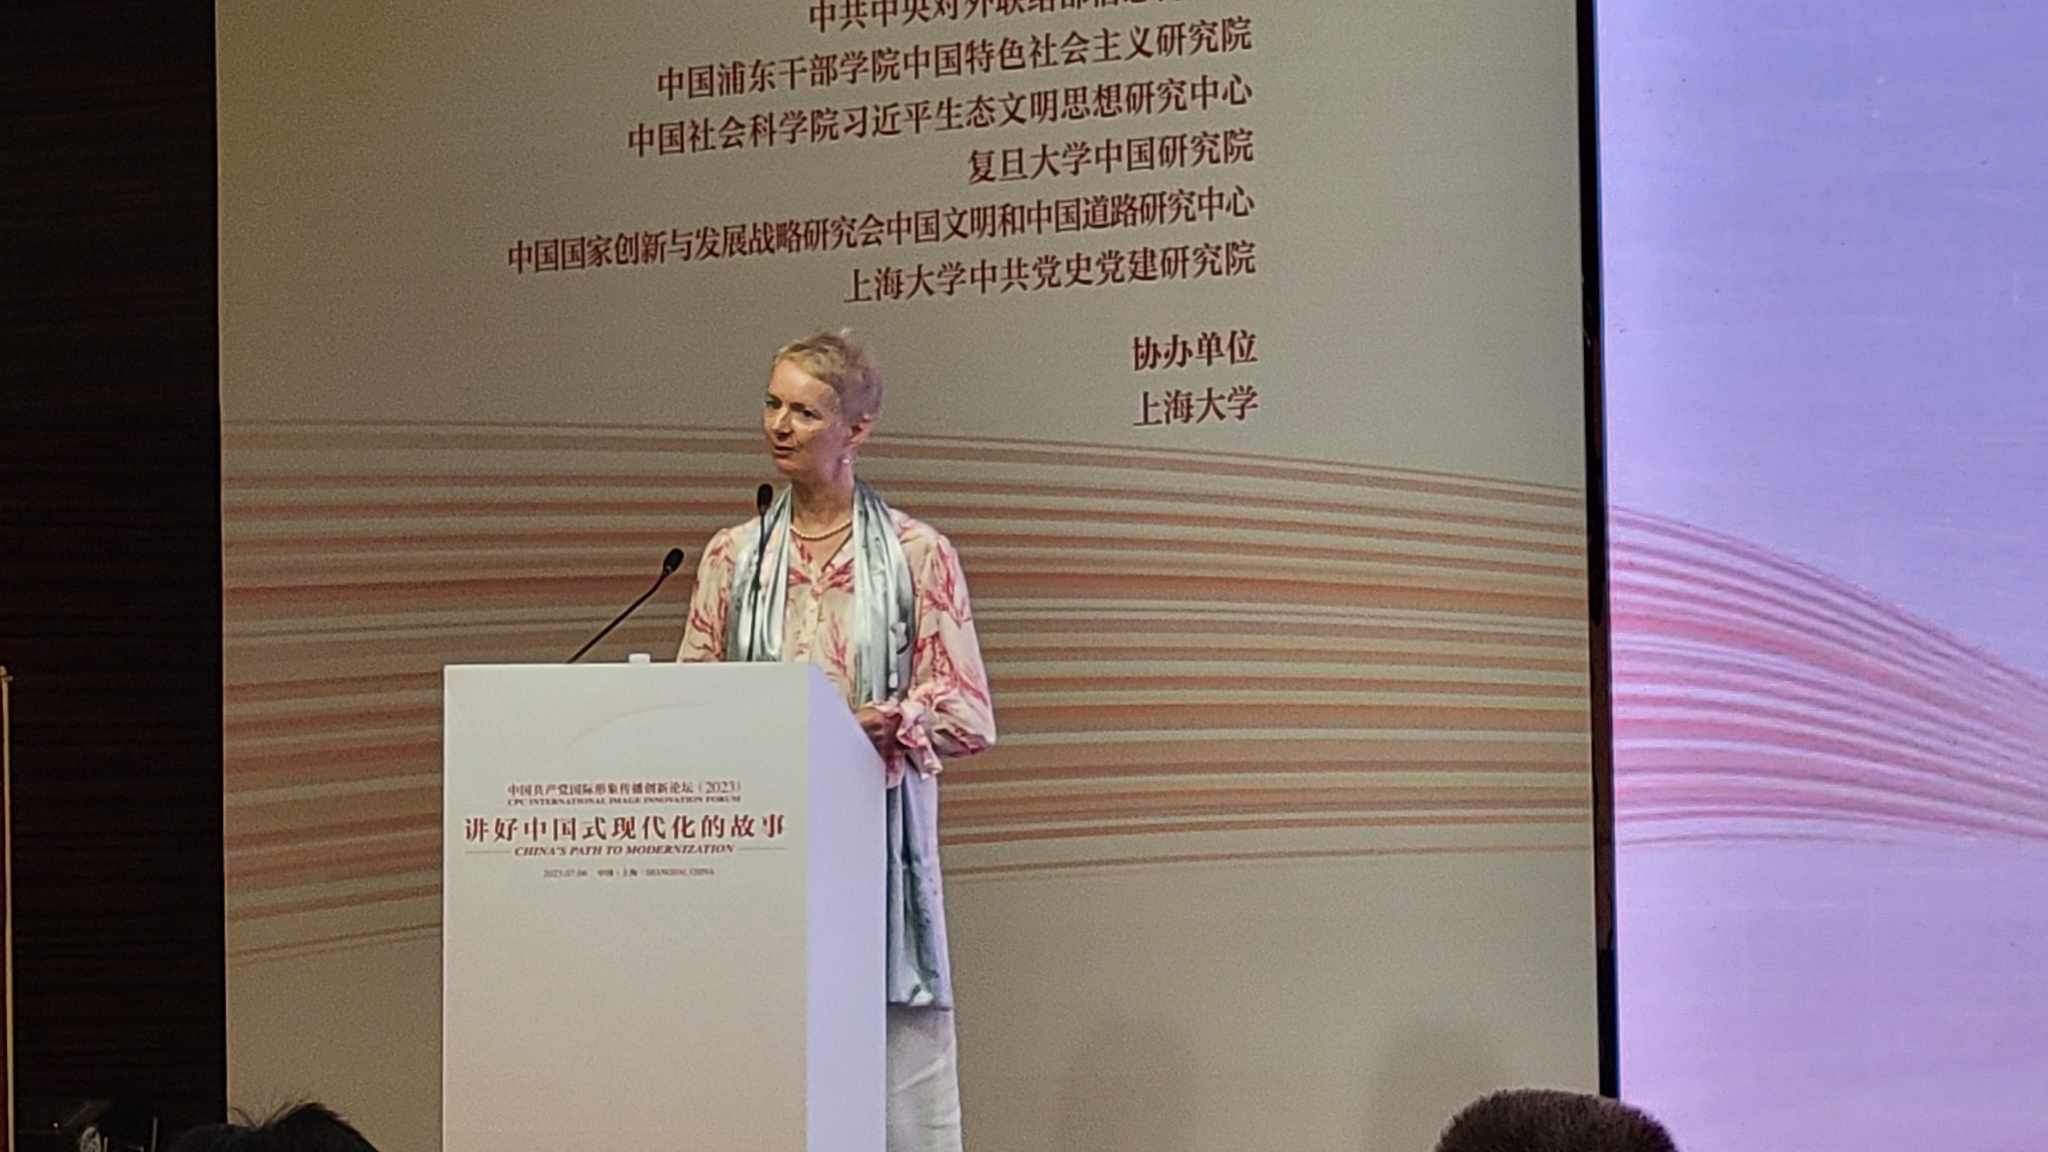 Rose Oliver Invited as Keynote Speaker for ‘China’s Path to Modernization’ Conference